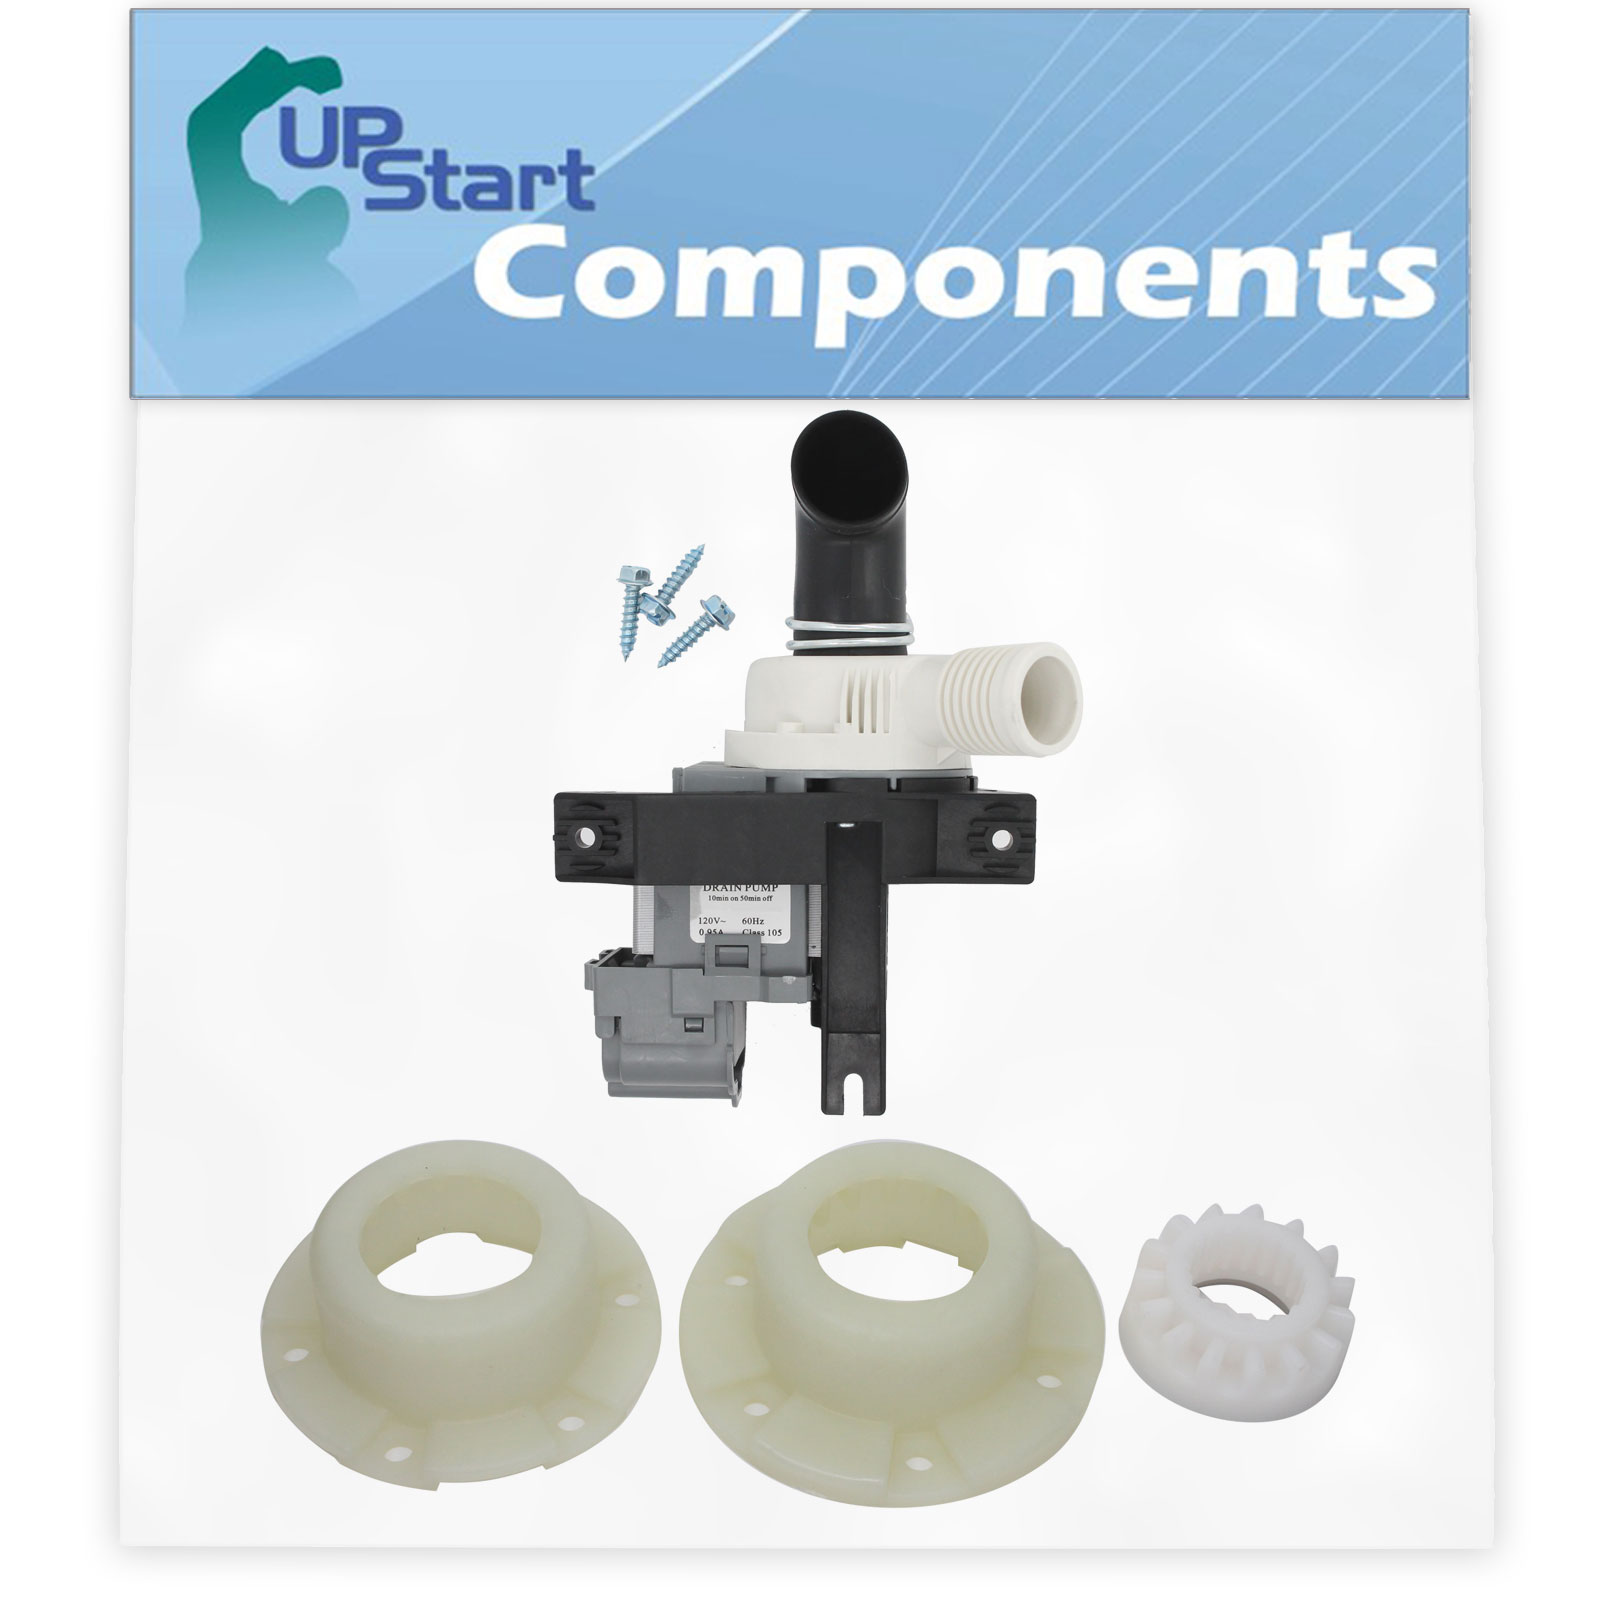 W10536347 Washer Drain Pump & 280145 Hub Kit Replacement for Maytag MTW6600TQ1 Washing Machine - Compatible with W10217134 Water Pump & W10820039 Basket Hub Kit - UpStart Components Brand - image 1 of 4